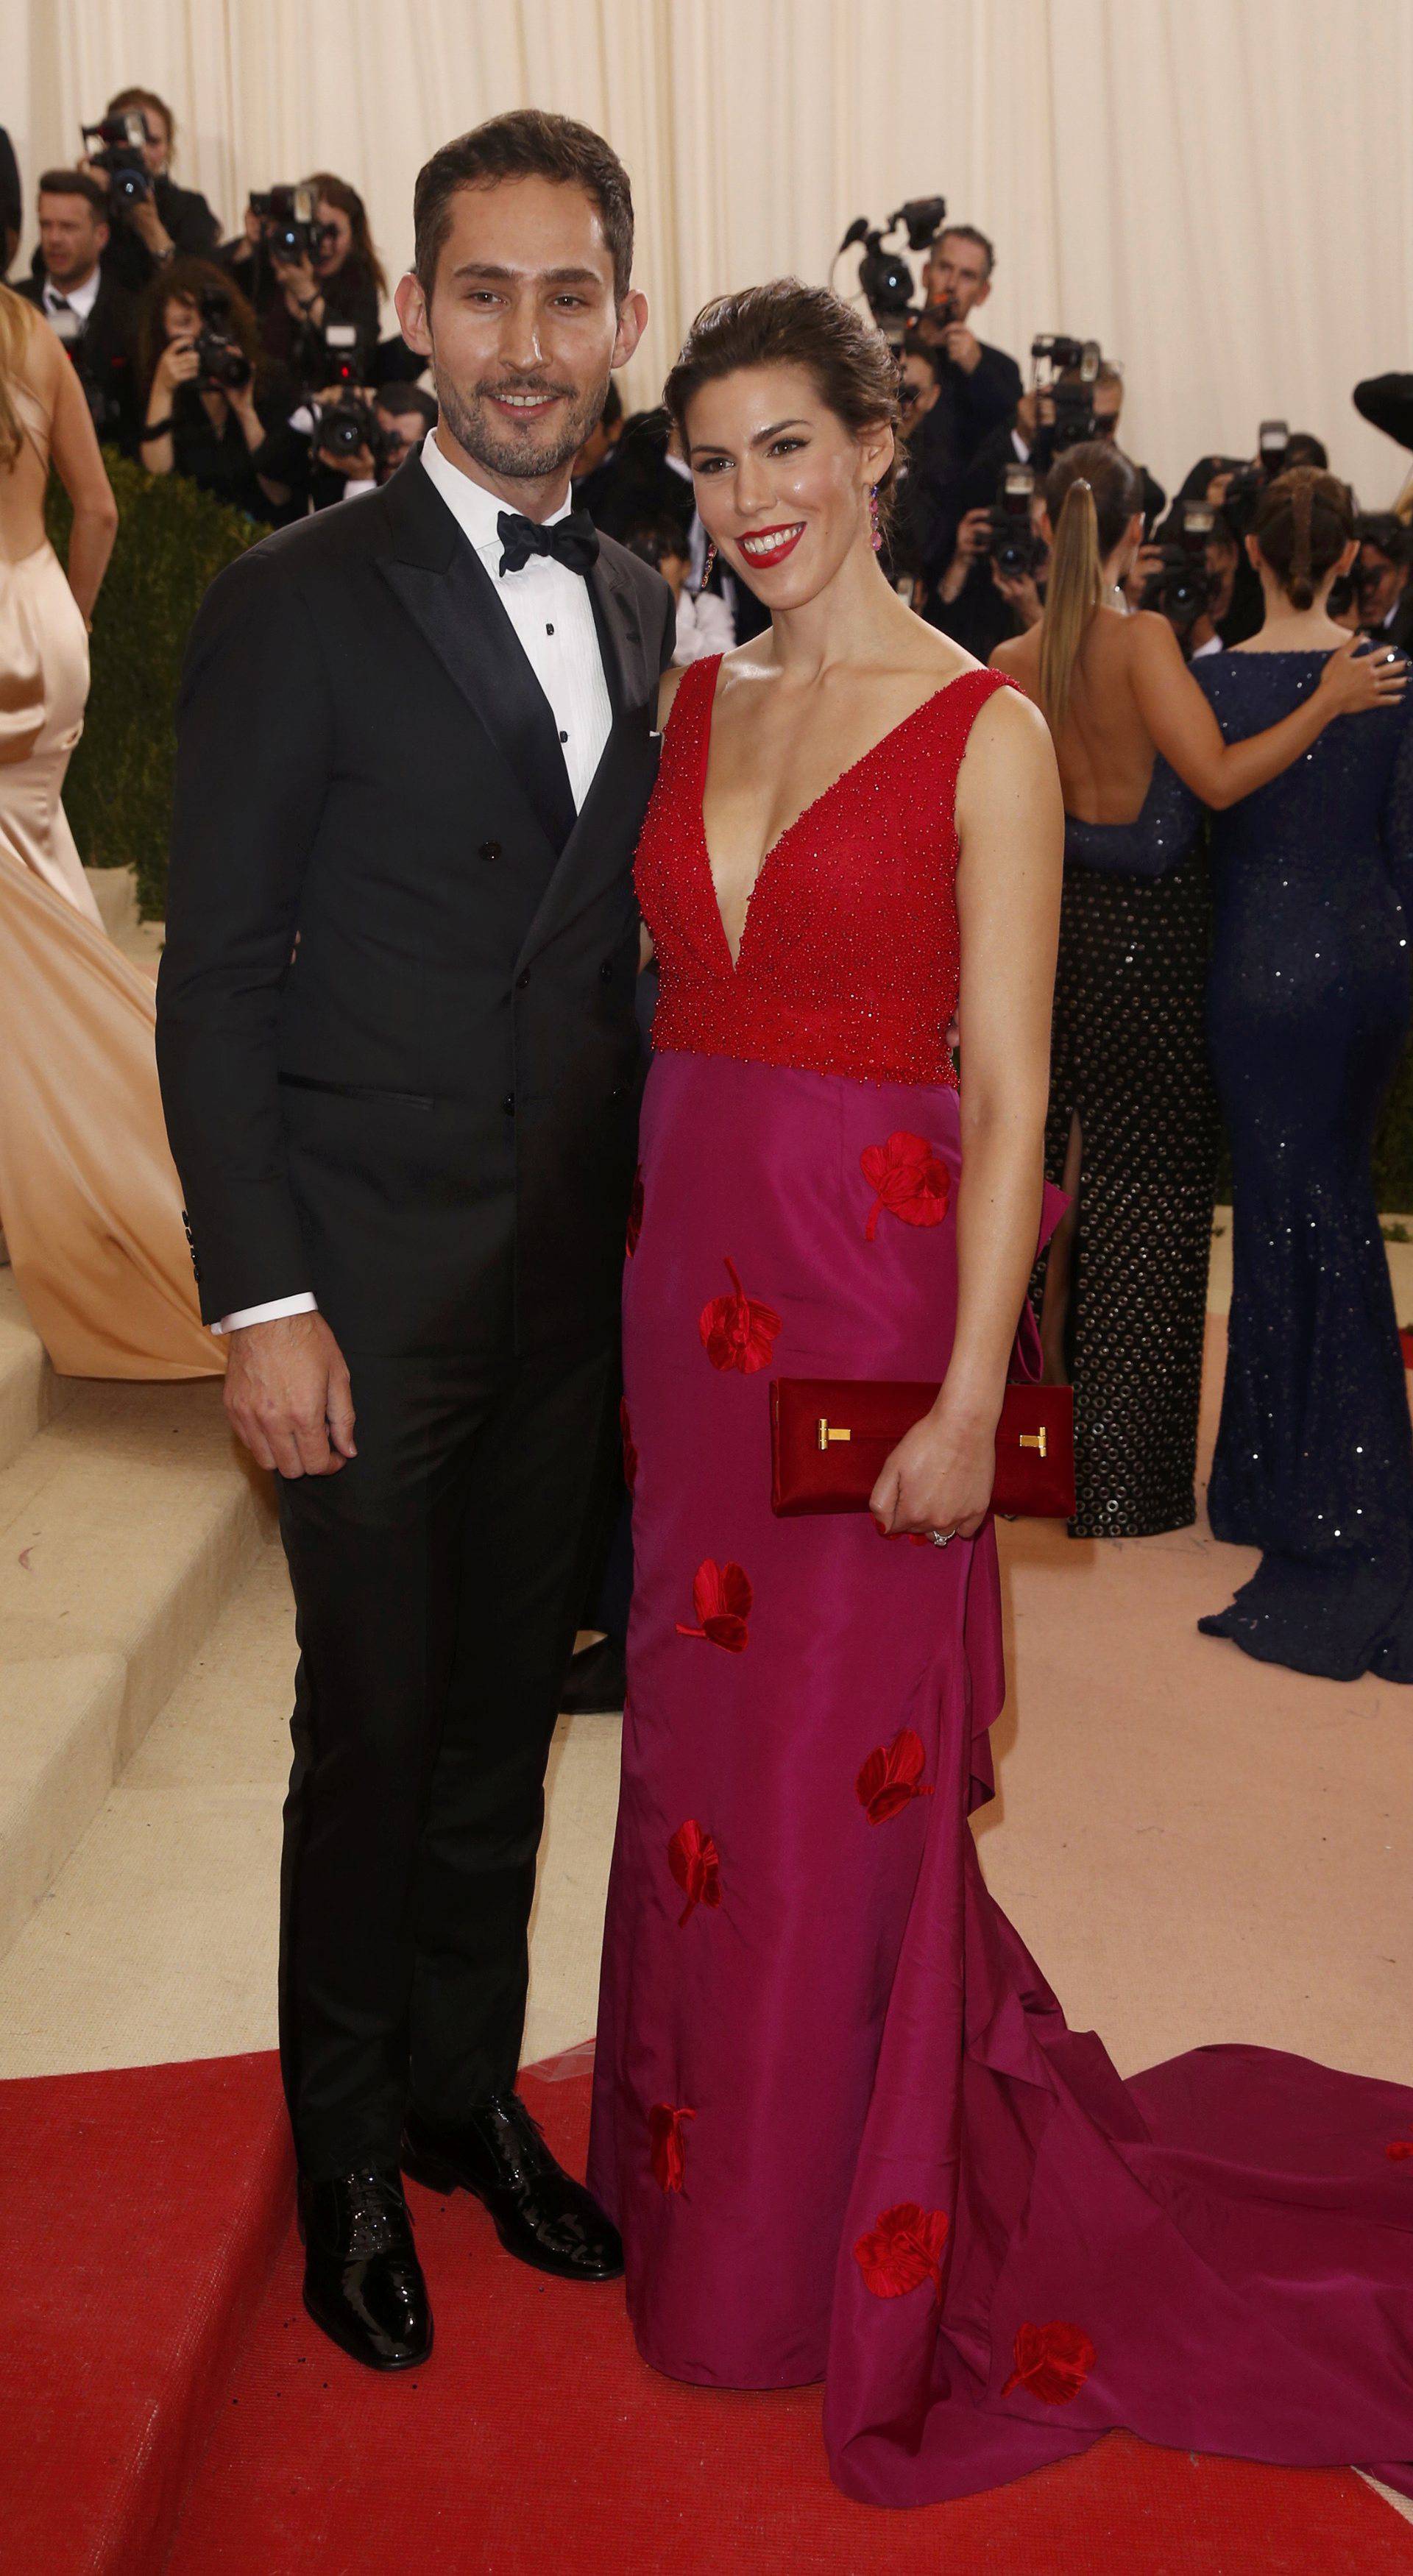 Instagram founder and CEO Kevin Systrom and wife Nicole Schuetz arrive at the Met Gala in New York